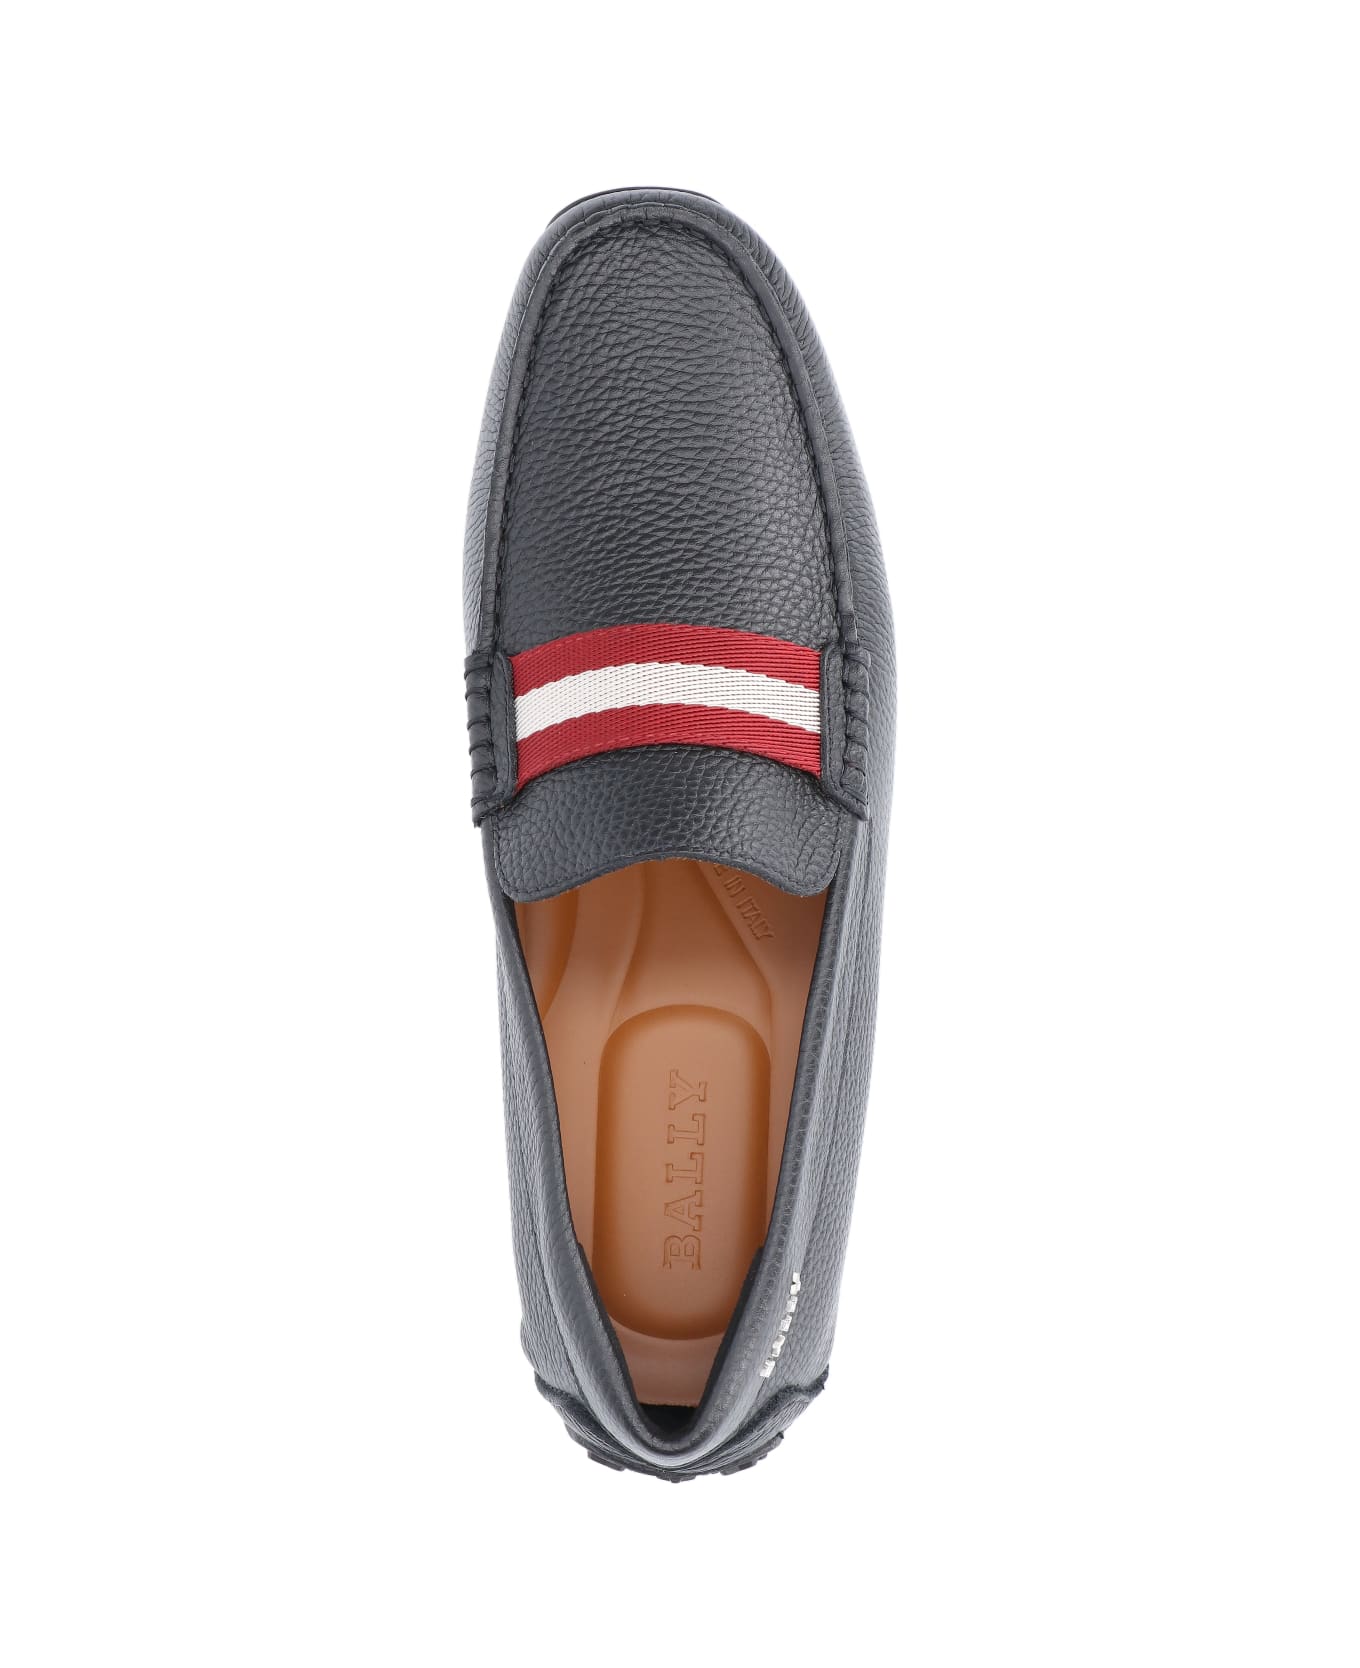 Bally Loafers "pearce" - Black  